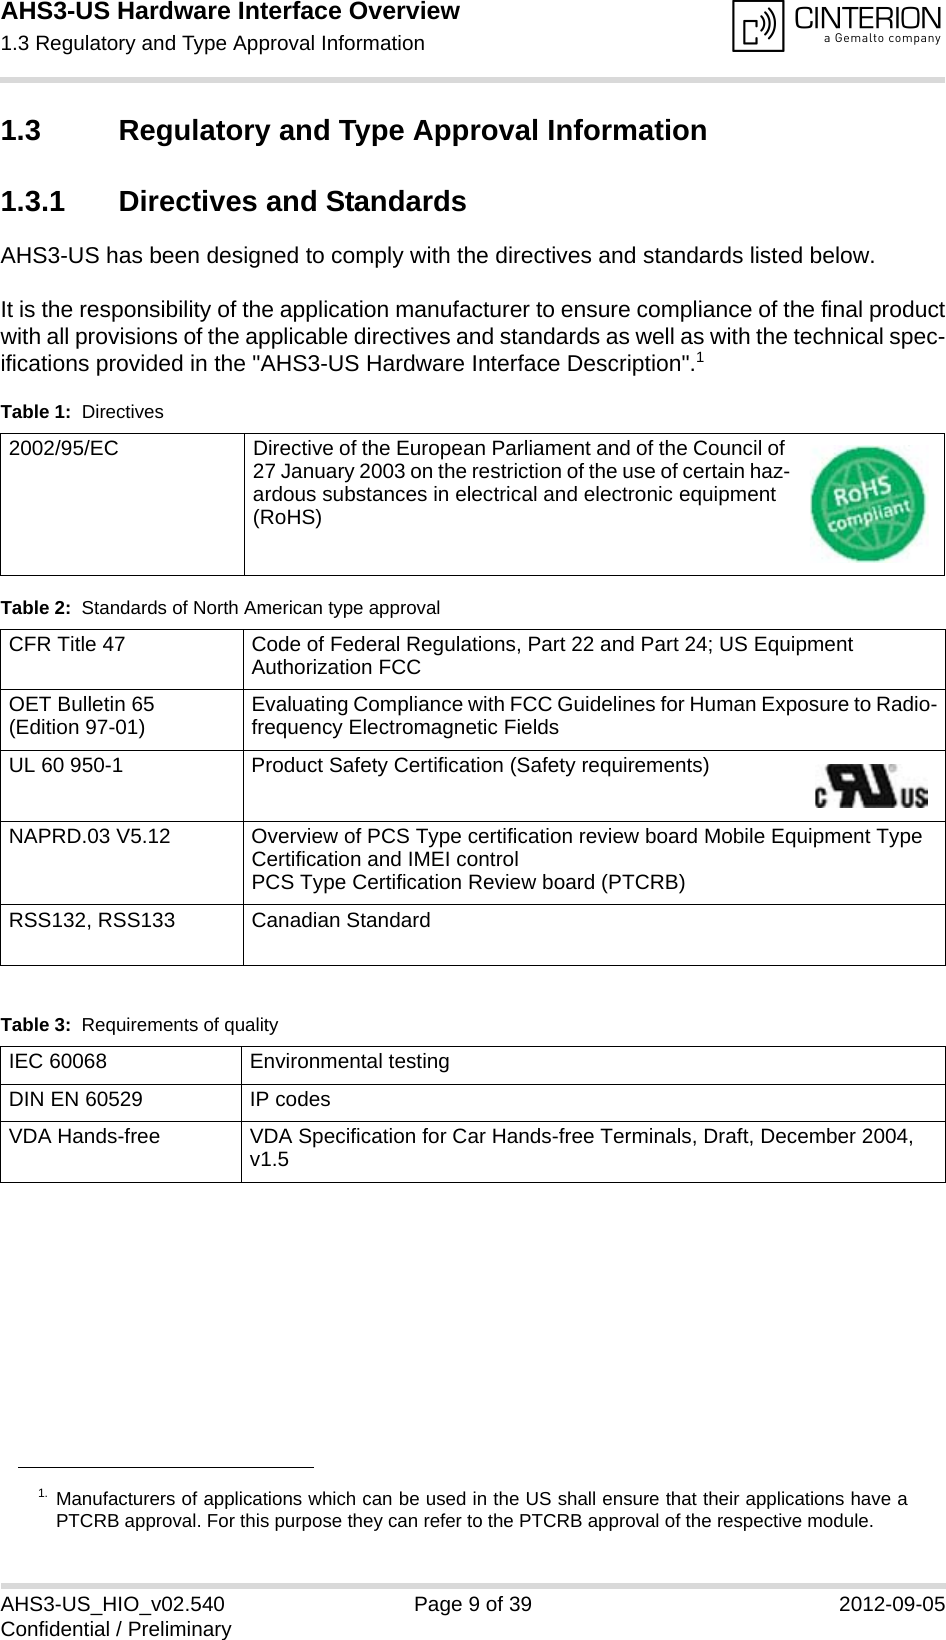 AHS3-US Hardware Interface Overview1.3 Regulatory and Type Approval Information13AHS3-US_HIO_v02.540 Page 9 of 39 2012-09-05Confidential / Preliminary1.3 Regulatory and Type Approval Information1.3.1 Directives and StandardsAHS3-US has been designed to comply with the directives and standards listed below.It is the responsibility of the application manufacturer to ensure compliance of the final productwith all provisions of the applicable directives and standards as well as with the technical spec-ifications provided in the &quot;AHS3-US Hardware Interface Description&quot;.11. Manufacturers of applications which can be used in the US shall ensure that their applications have aPTCRB approval. For this purpose they can refer to the PTCRB approval of the respective module. Table 1:  Directives2002/95/EC  Directive of the European Parliament and of the Council of 27 January 2003 on the restriction of the use of certain haz-ardous substances in electrical and electronic equipment (RoHS)Table 2:  Standards of North American type approvalCFR Title 47 Code of Federal Regulations, Part 22 and Part 24; US Equipment Authorization FCCOET Bulletin 65(Edition 97-01) Evaluating Compliance with FCC Guidelines for Human Exposure to Radio-frequency Electromagnetic FieldsUL 60 950-1 Product Safety Certification (Safety requirements) NAPRD.03 V5.12 Overview of PCS Type certification review board Mobile Equipment Type Certification and IMEI controlPCS Type Certification Review board (PTCRB)RSS132, RSS133  Canadian StandardTable 3:  Requirements of qualityIEC 60068 Environmental testingDIN EN 60529 IP codesVDA Hands-free  VDA Specification for Car Hands-free Terminals, Draft, December 2004, v1.5